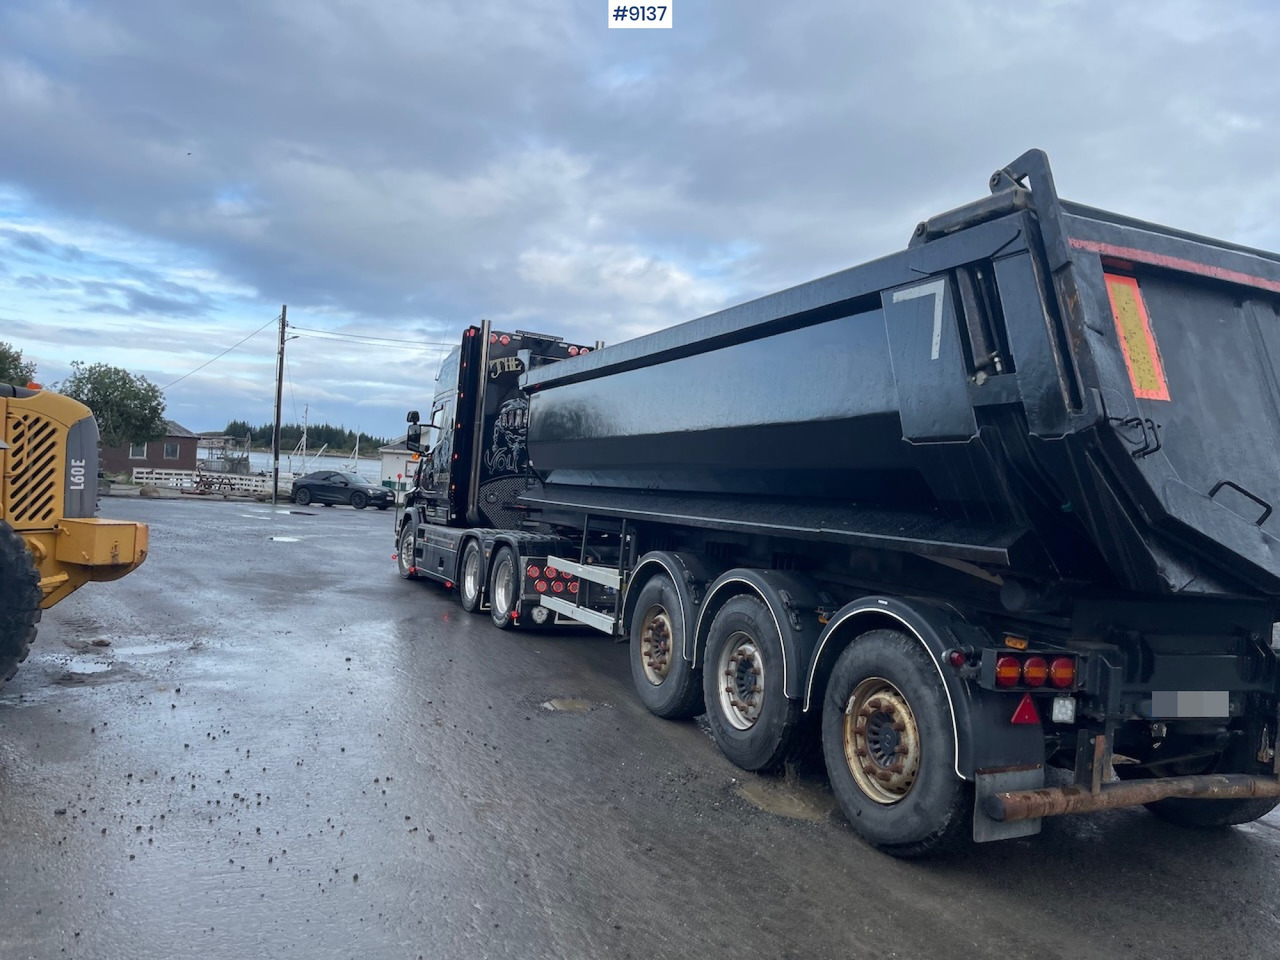 Carnehl tipping semi trailer in good condition – Finanzierungsleasing Carnehl tipping semi trailer in good condition: das Bild 9